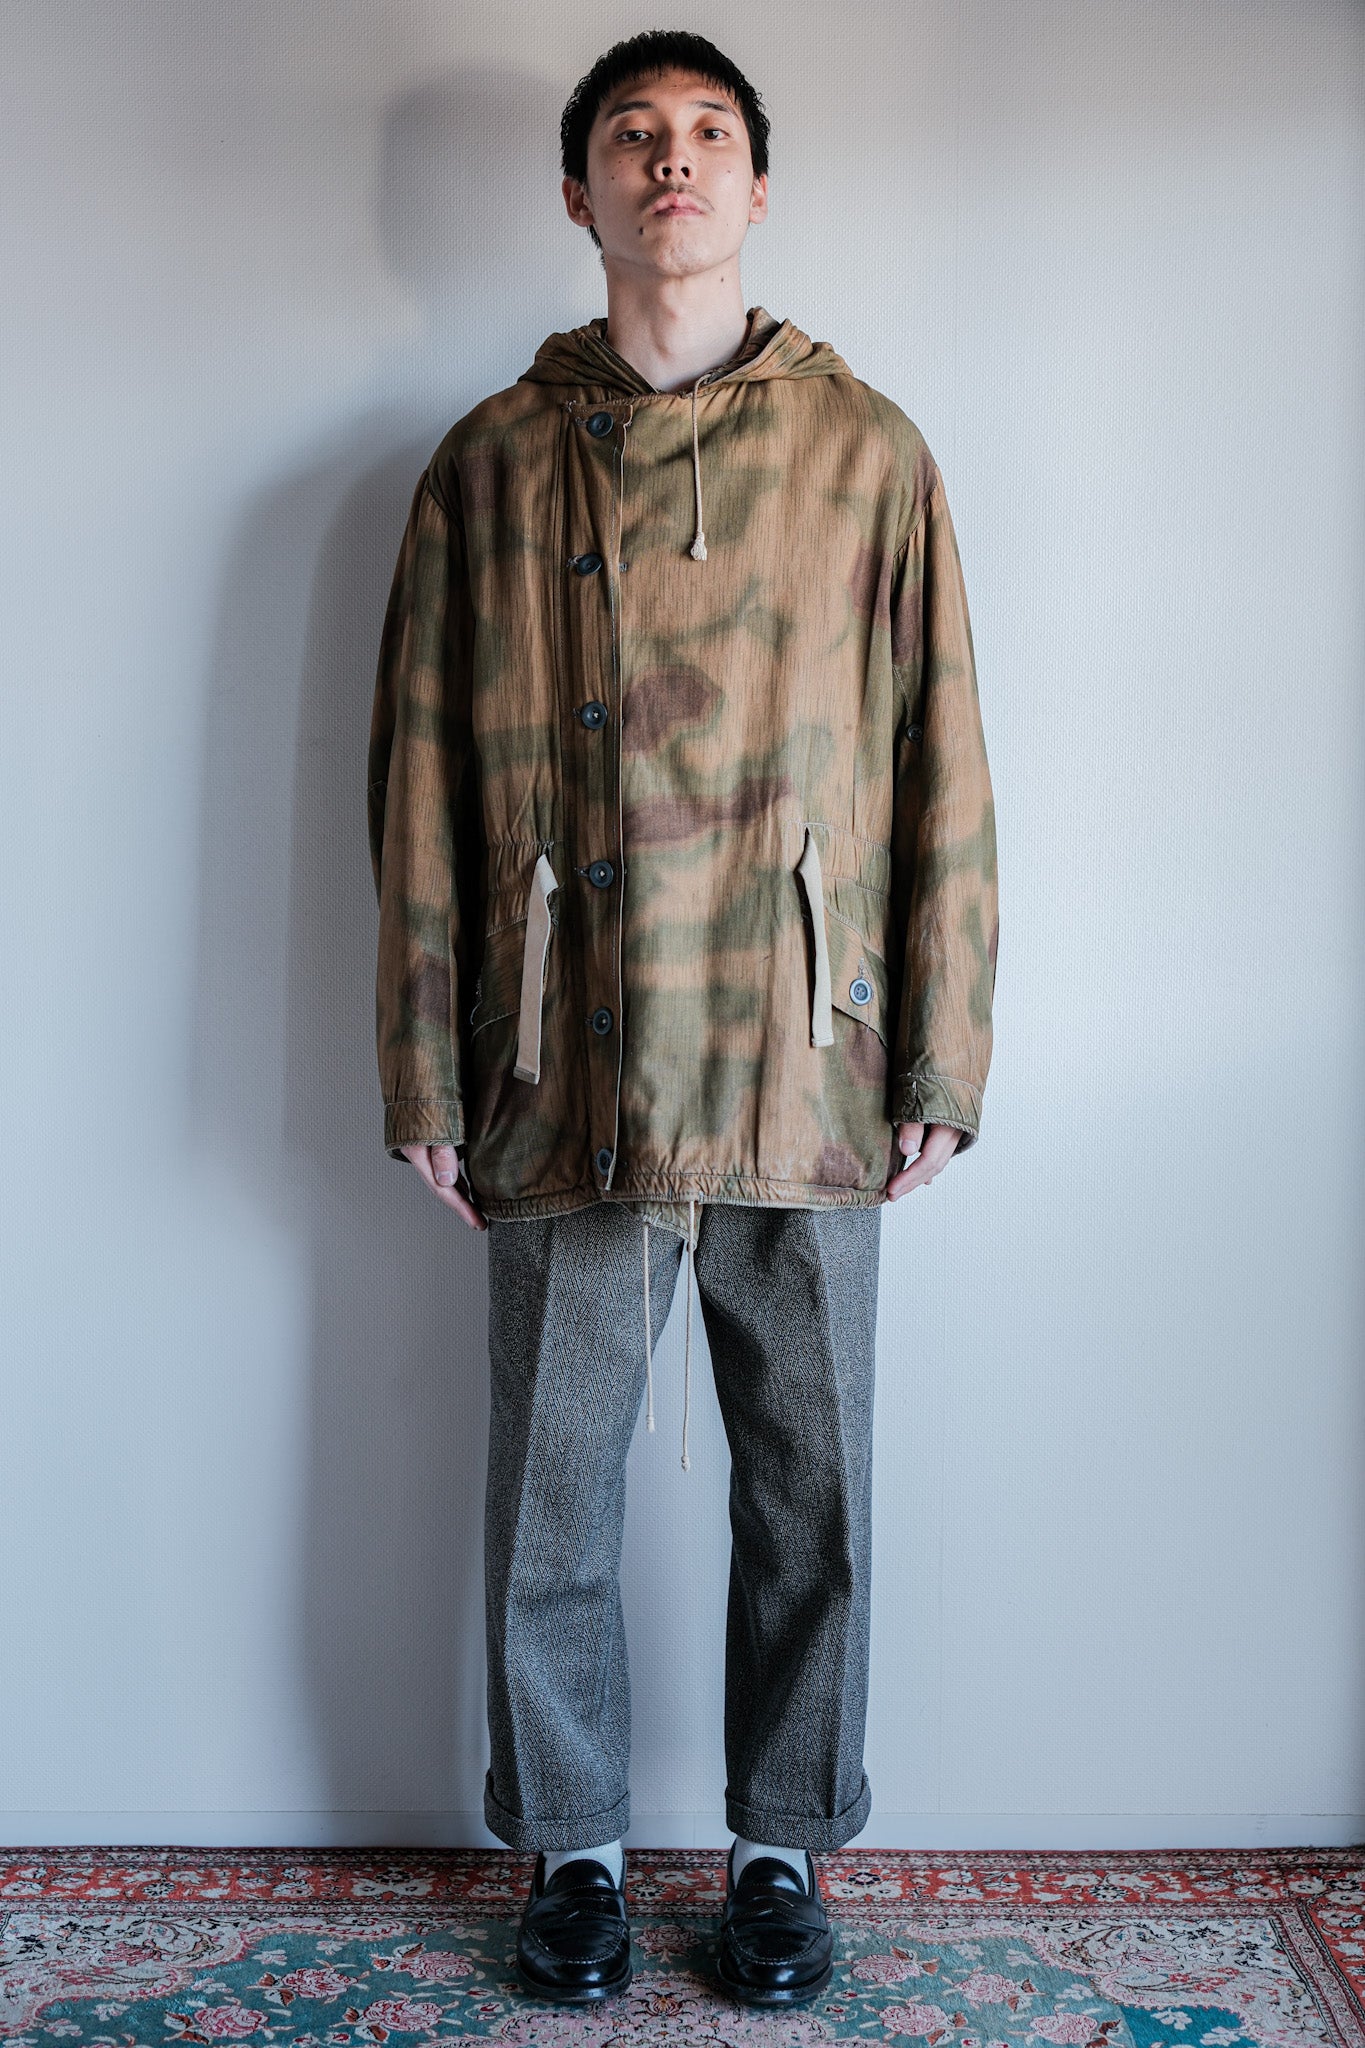 [~ 40's] WWⅱ Army allemand Sumpfternmster 44 Camouflage 43 Pattern hiver parka "Wehrmacht"